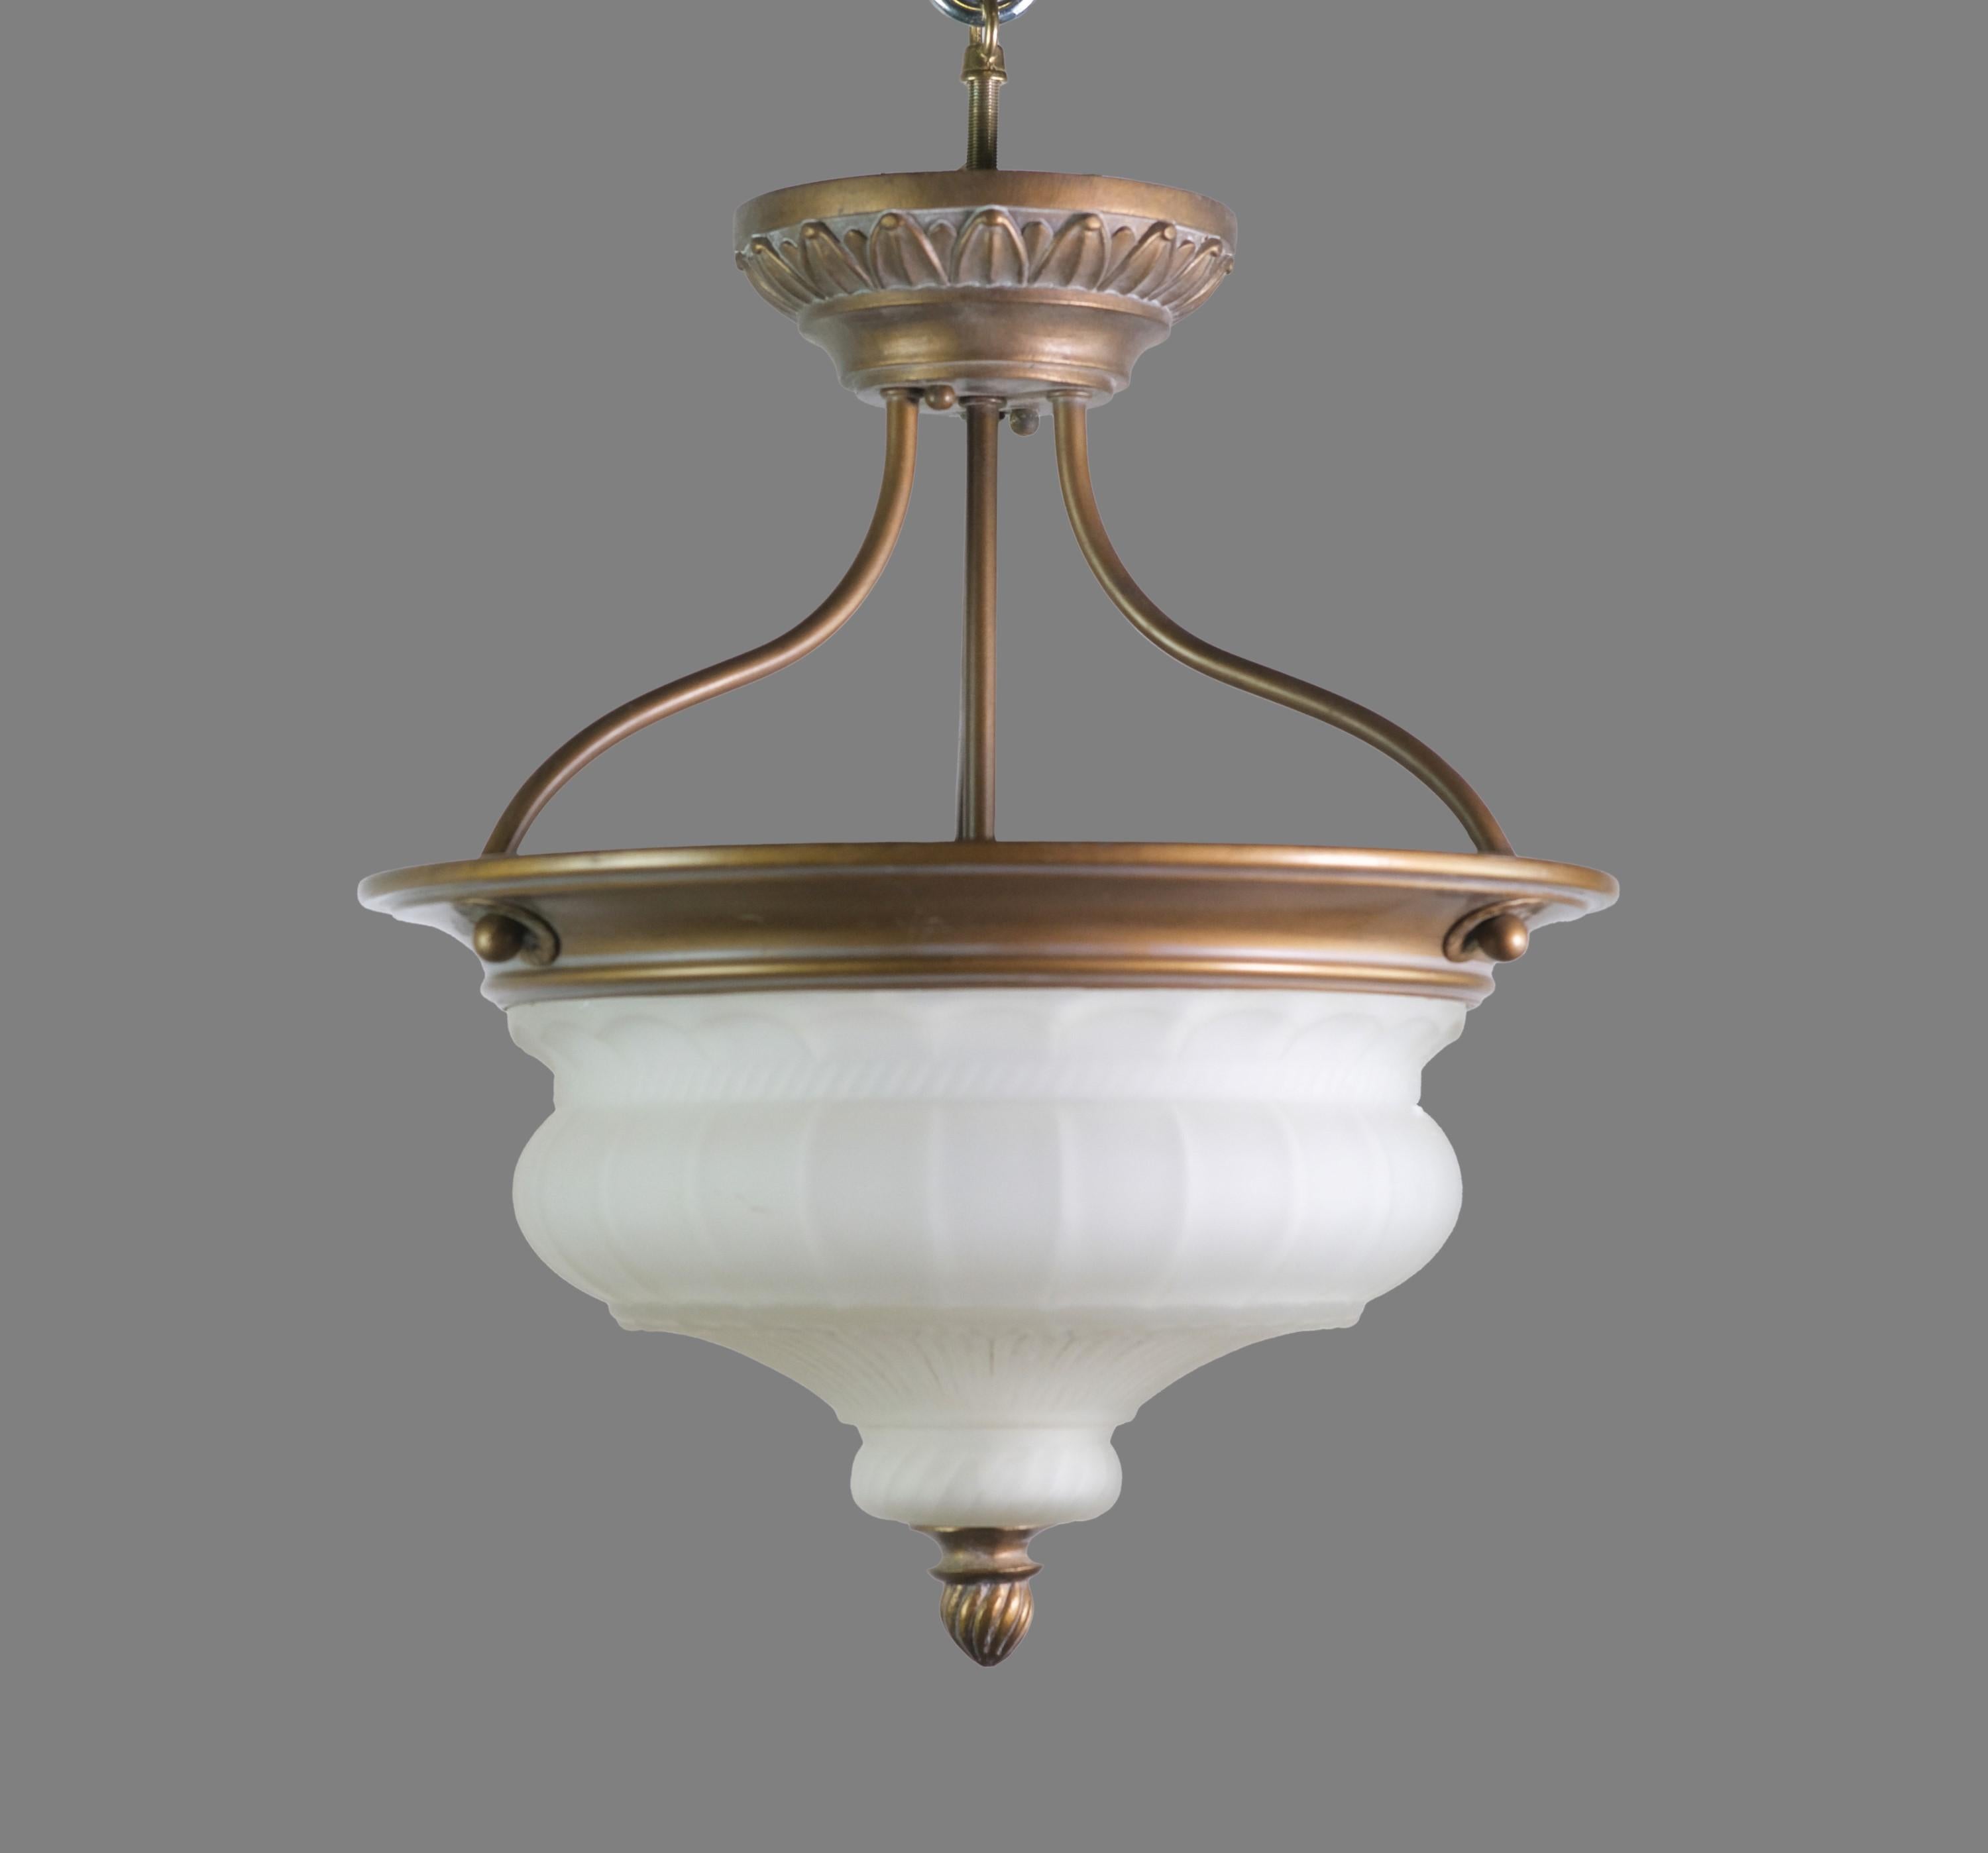 Classical style semi flush pendant ceiling light. Made of brass with a copper wash finish. Cast white dish light shade with a petal deisgn. Cleaned and restored. This has three standard medium base E26 sockets. This can be seen at our 400 Gilligan